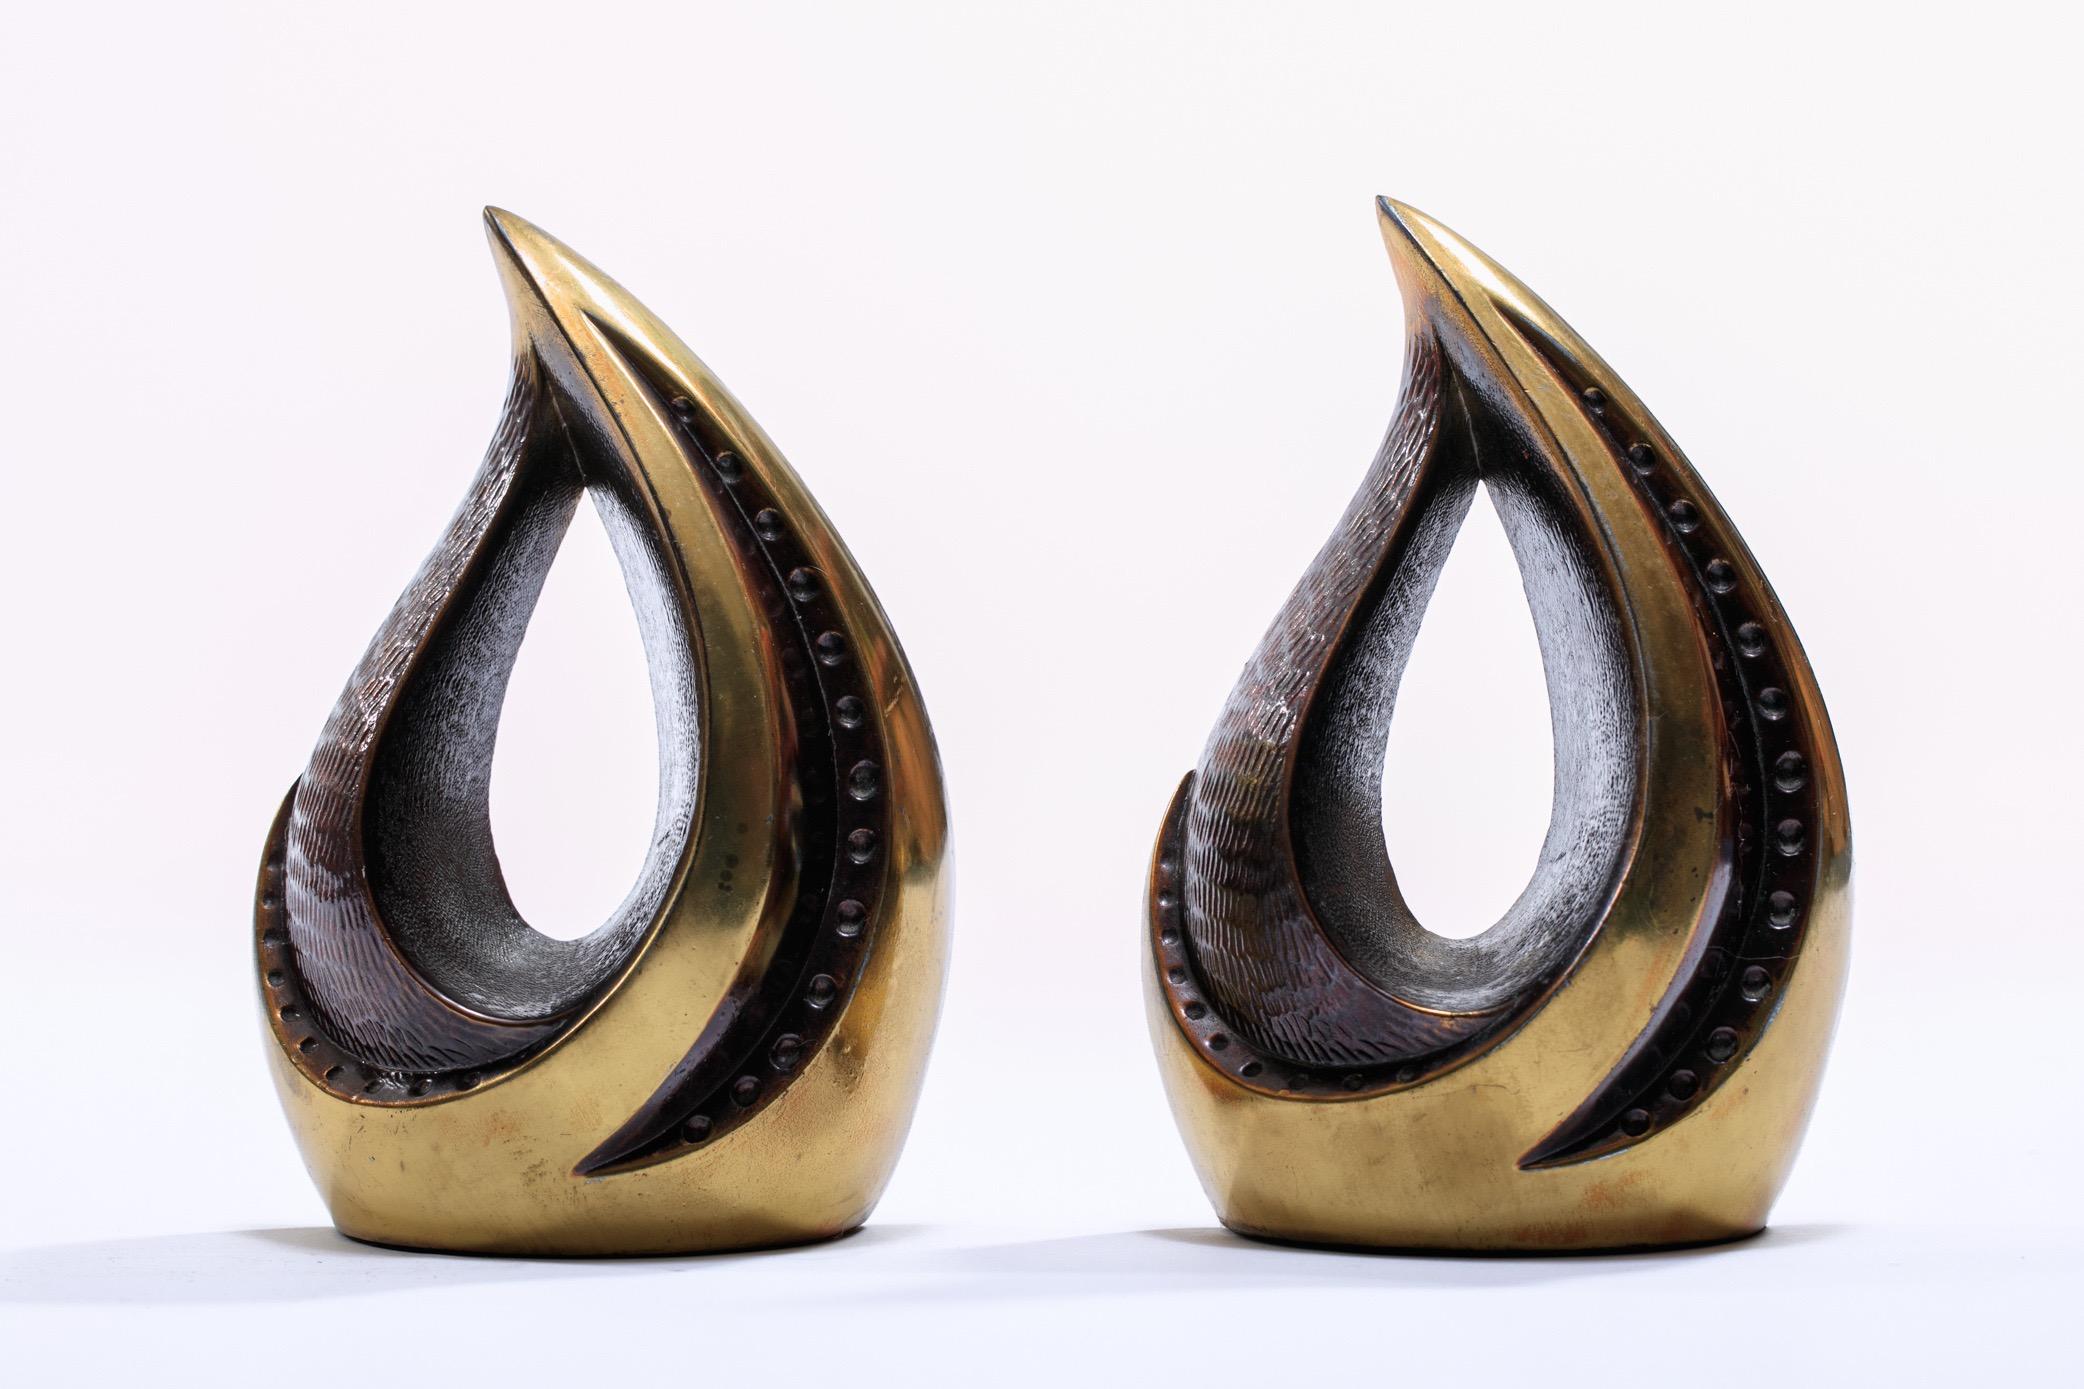 Sculptural brass Ben Seibel for Jenfred bookends, circa 1950s. A freeform, organic design in brass finish with applied patina that has deepened over time giving them an even more rich character. Want to see more beautiful things? Scroll down below